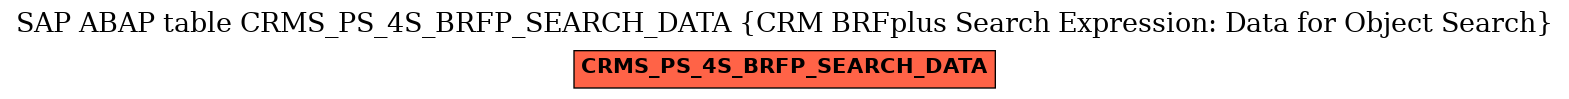 E-R Diagram for table CRMS_PS_4S_BRFP_SEARCH_DATA (CRM BRFplus Search Expression: Data for Object Search)